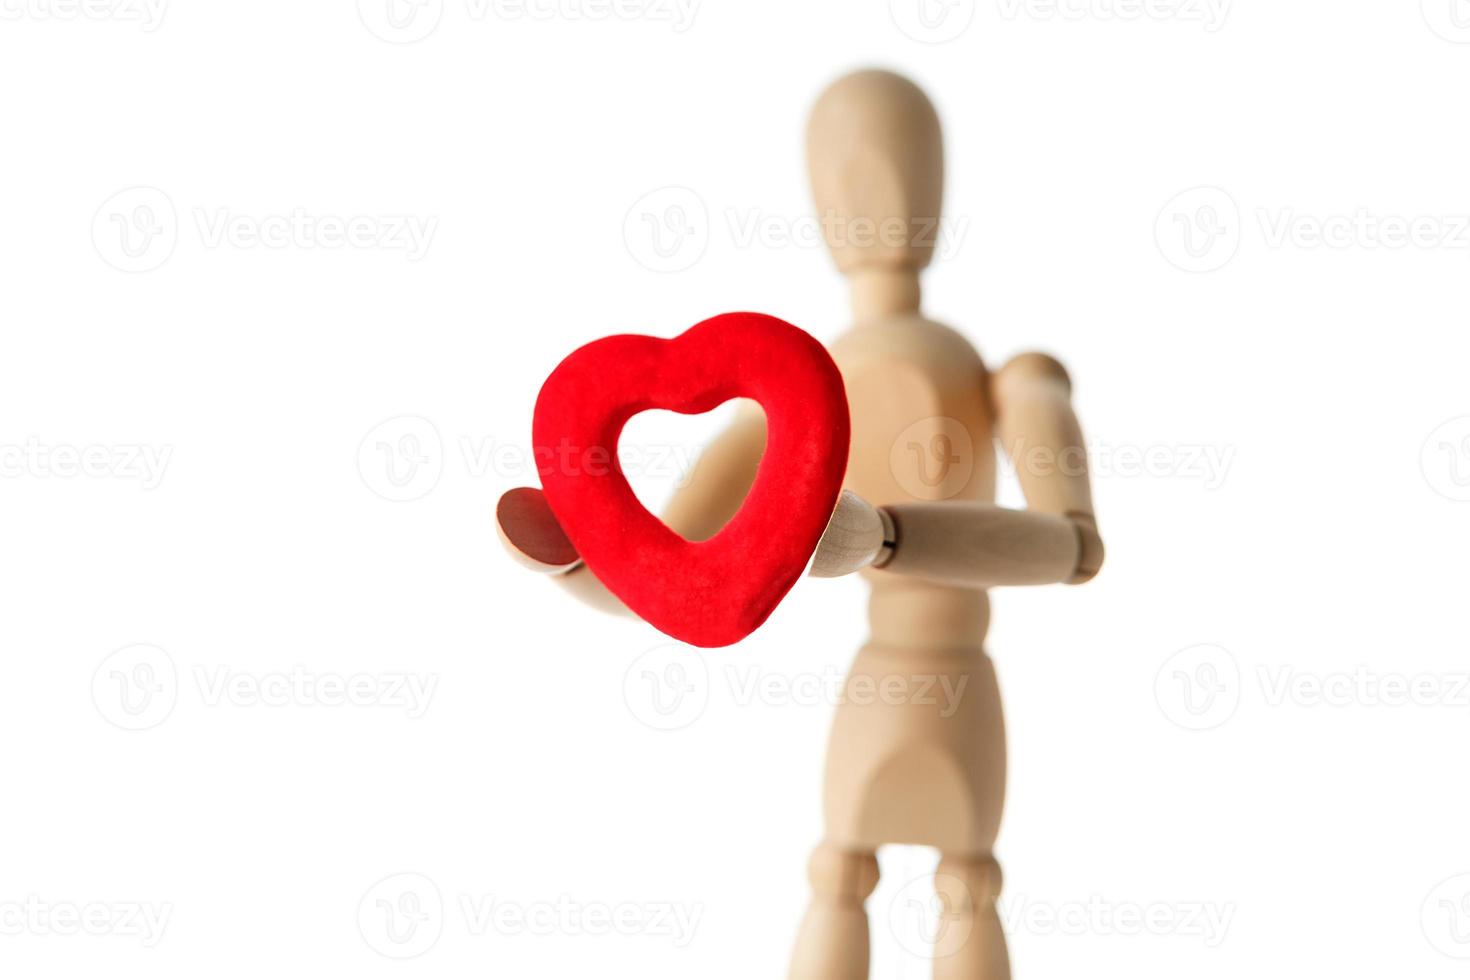 The wooden figure of a man holds in his hands a red heart on a white background. Gives the heart photo